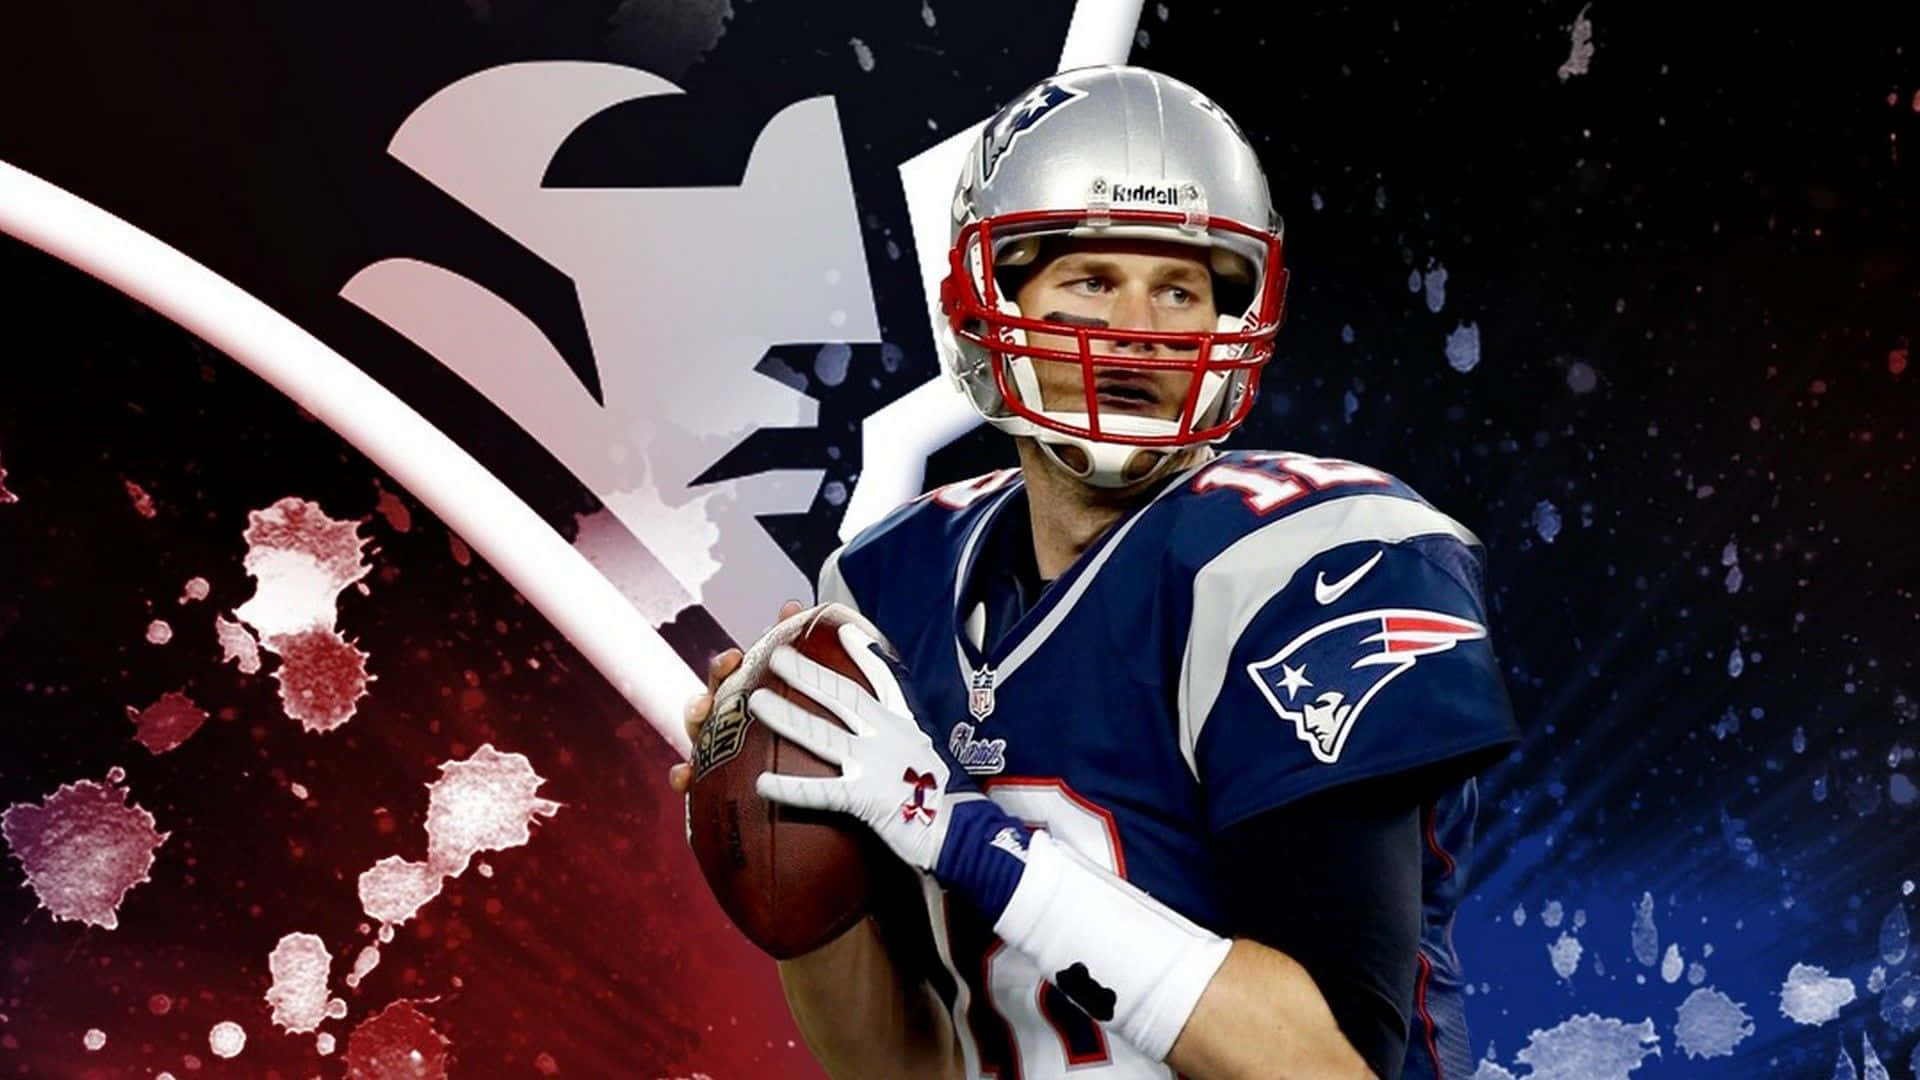 Tombrady, Fotbollens G.o.a.t. (greatest Of All Time) Wallpaper